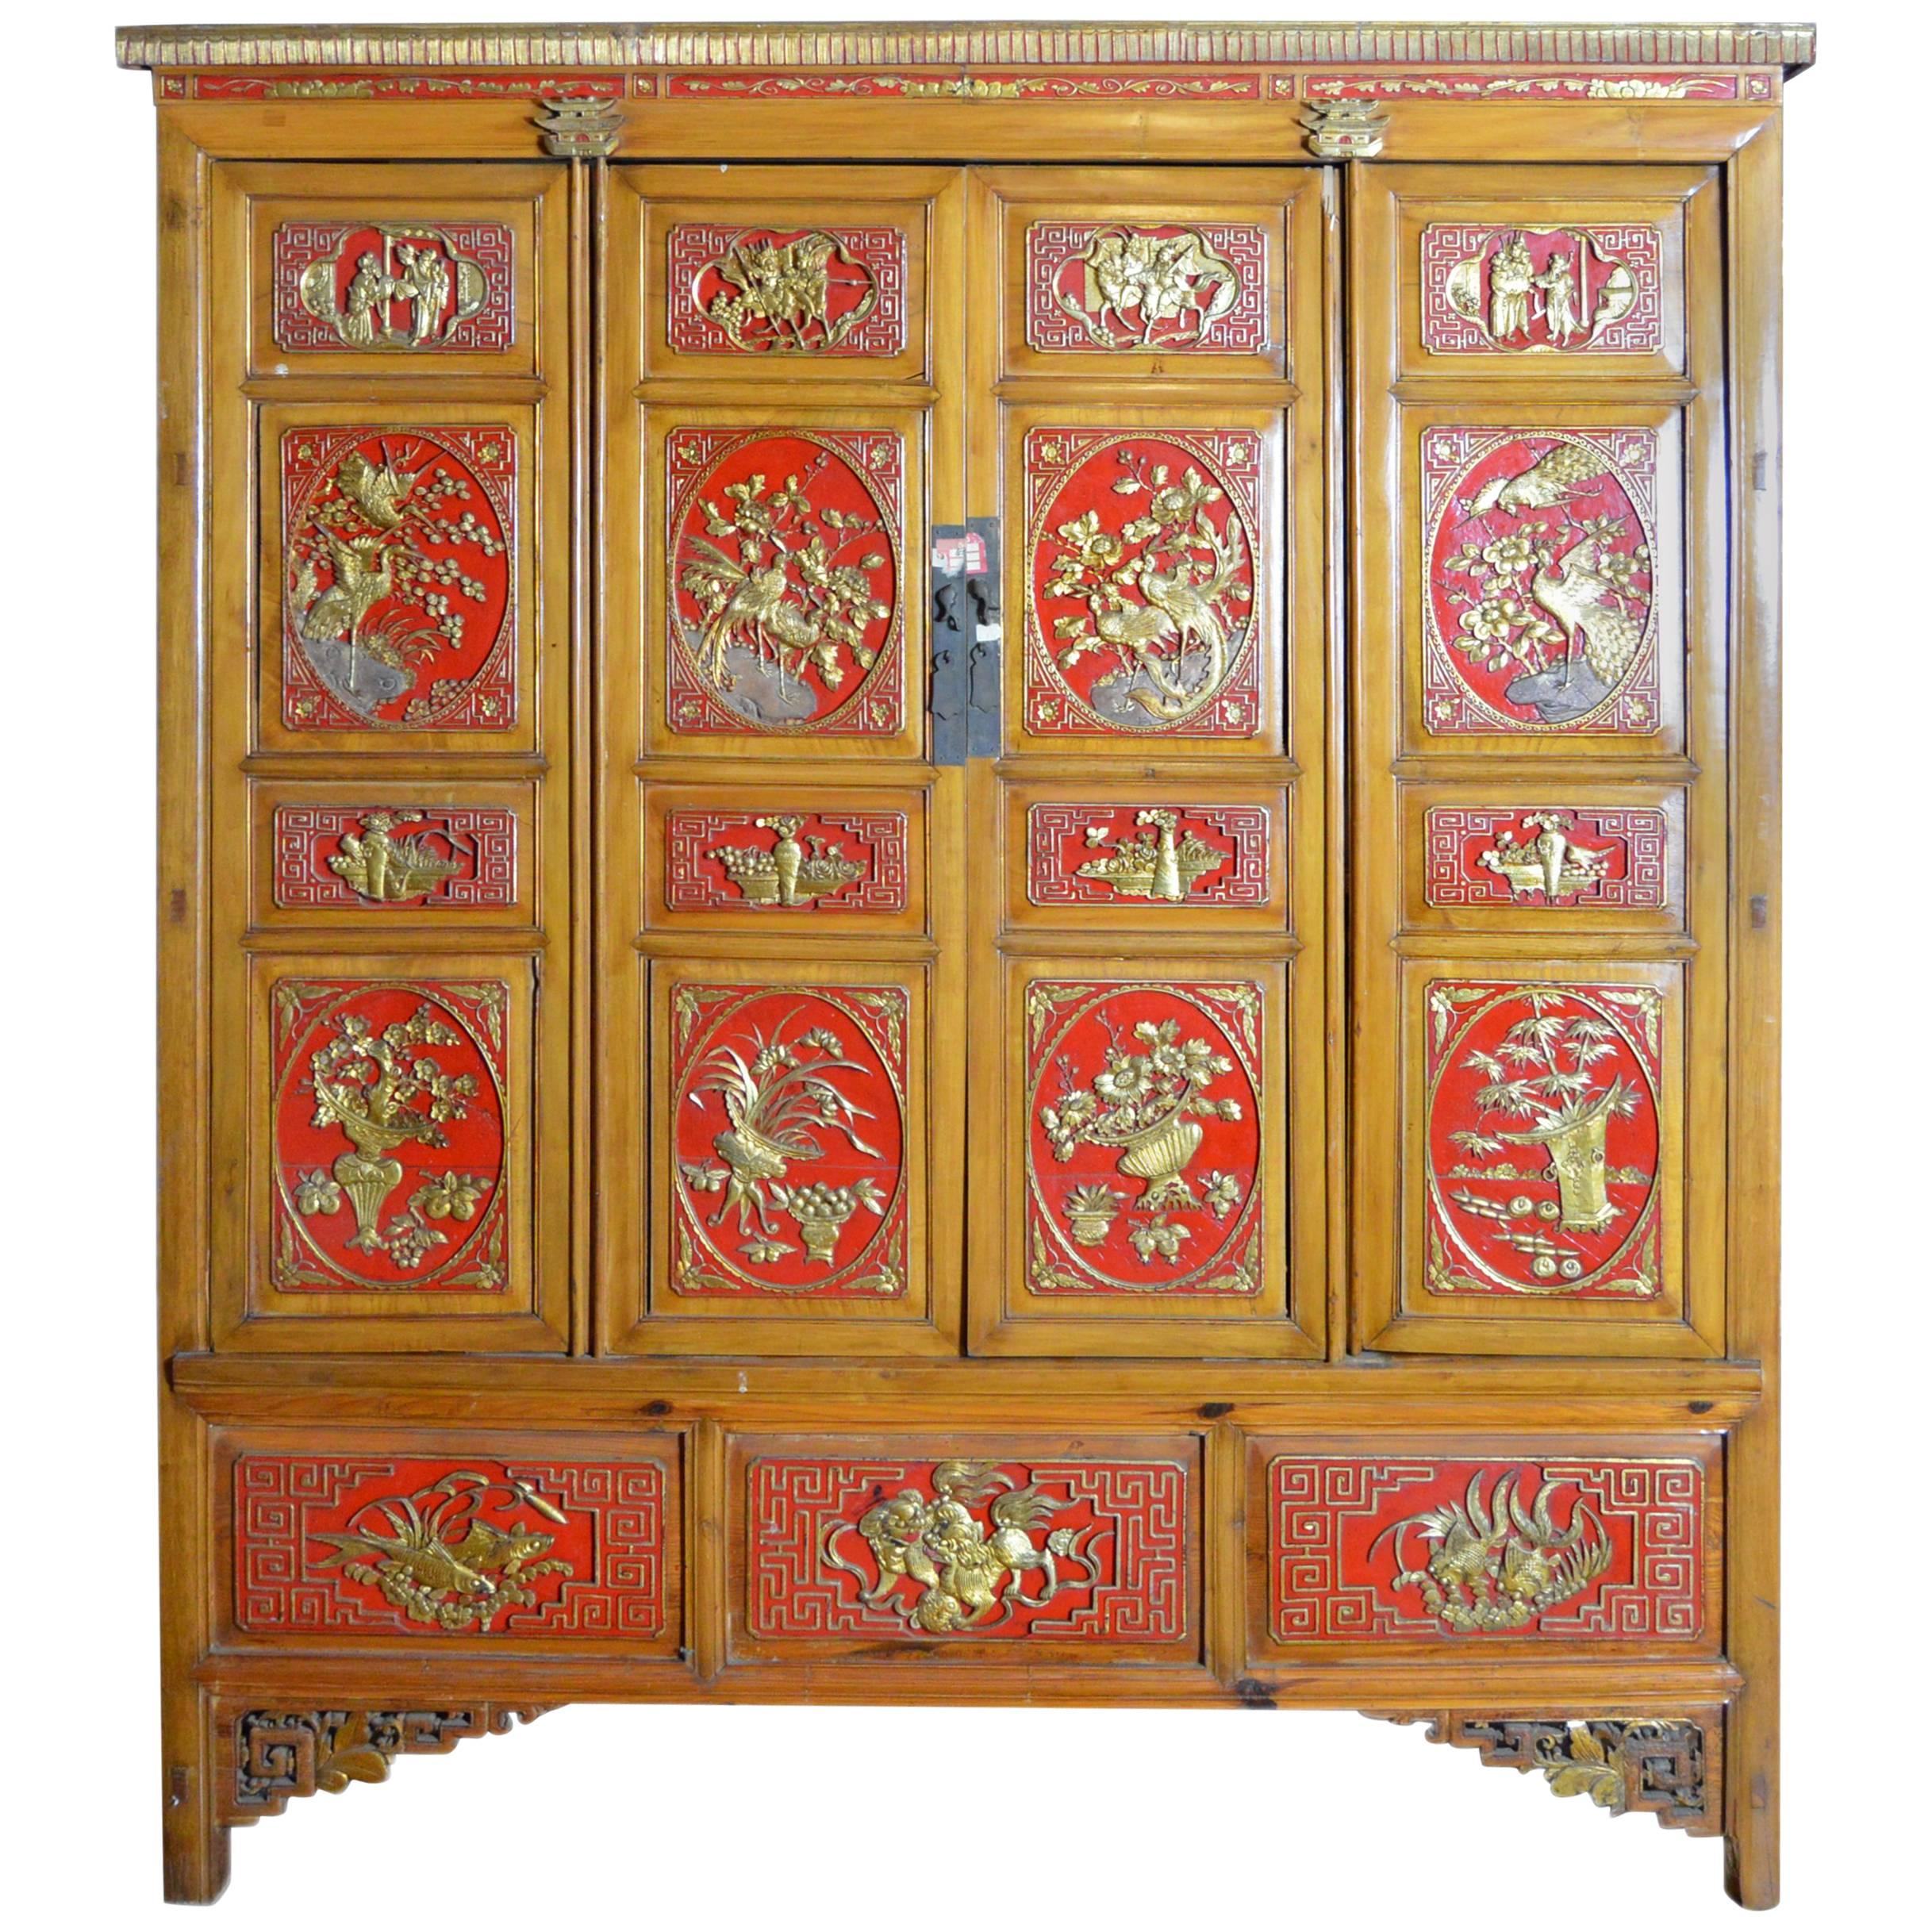 Qing Dynasty 19th Century Chinese Wooden Armoire with Hand-Carved Gilt Panels